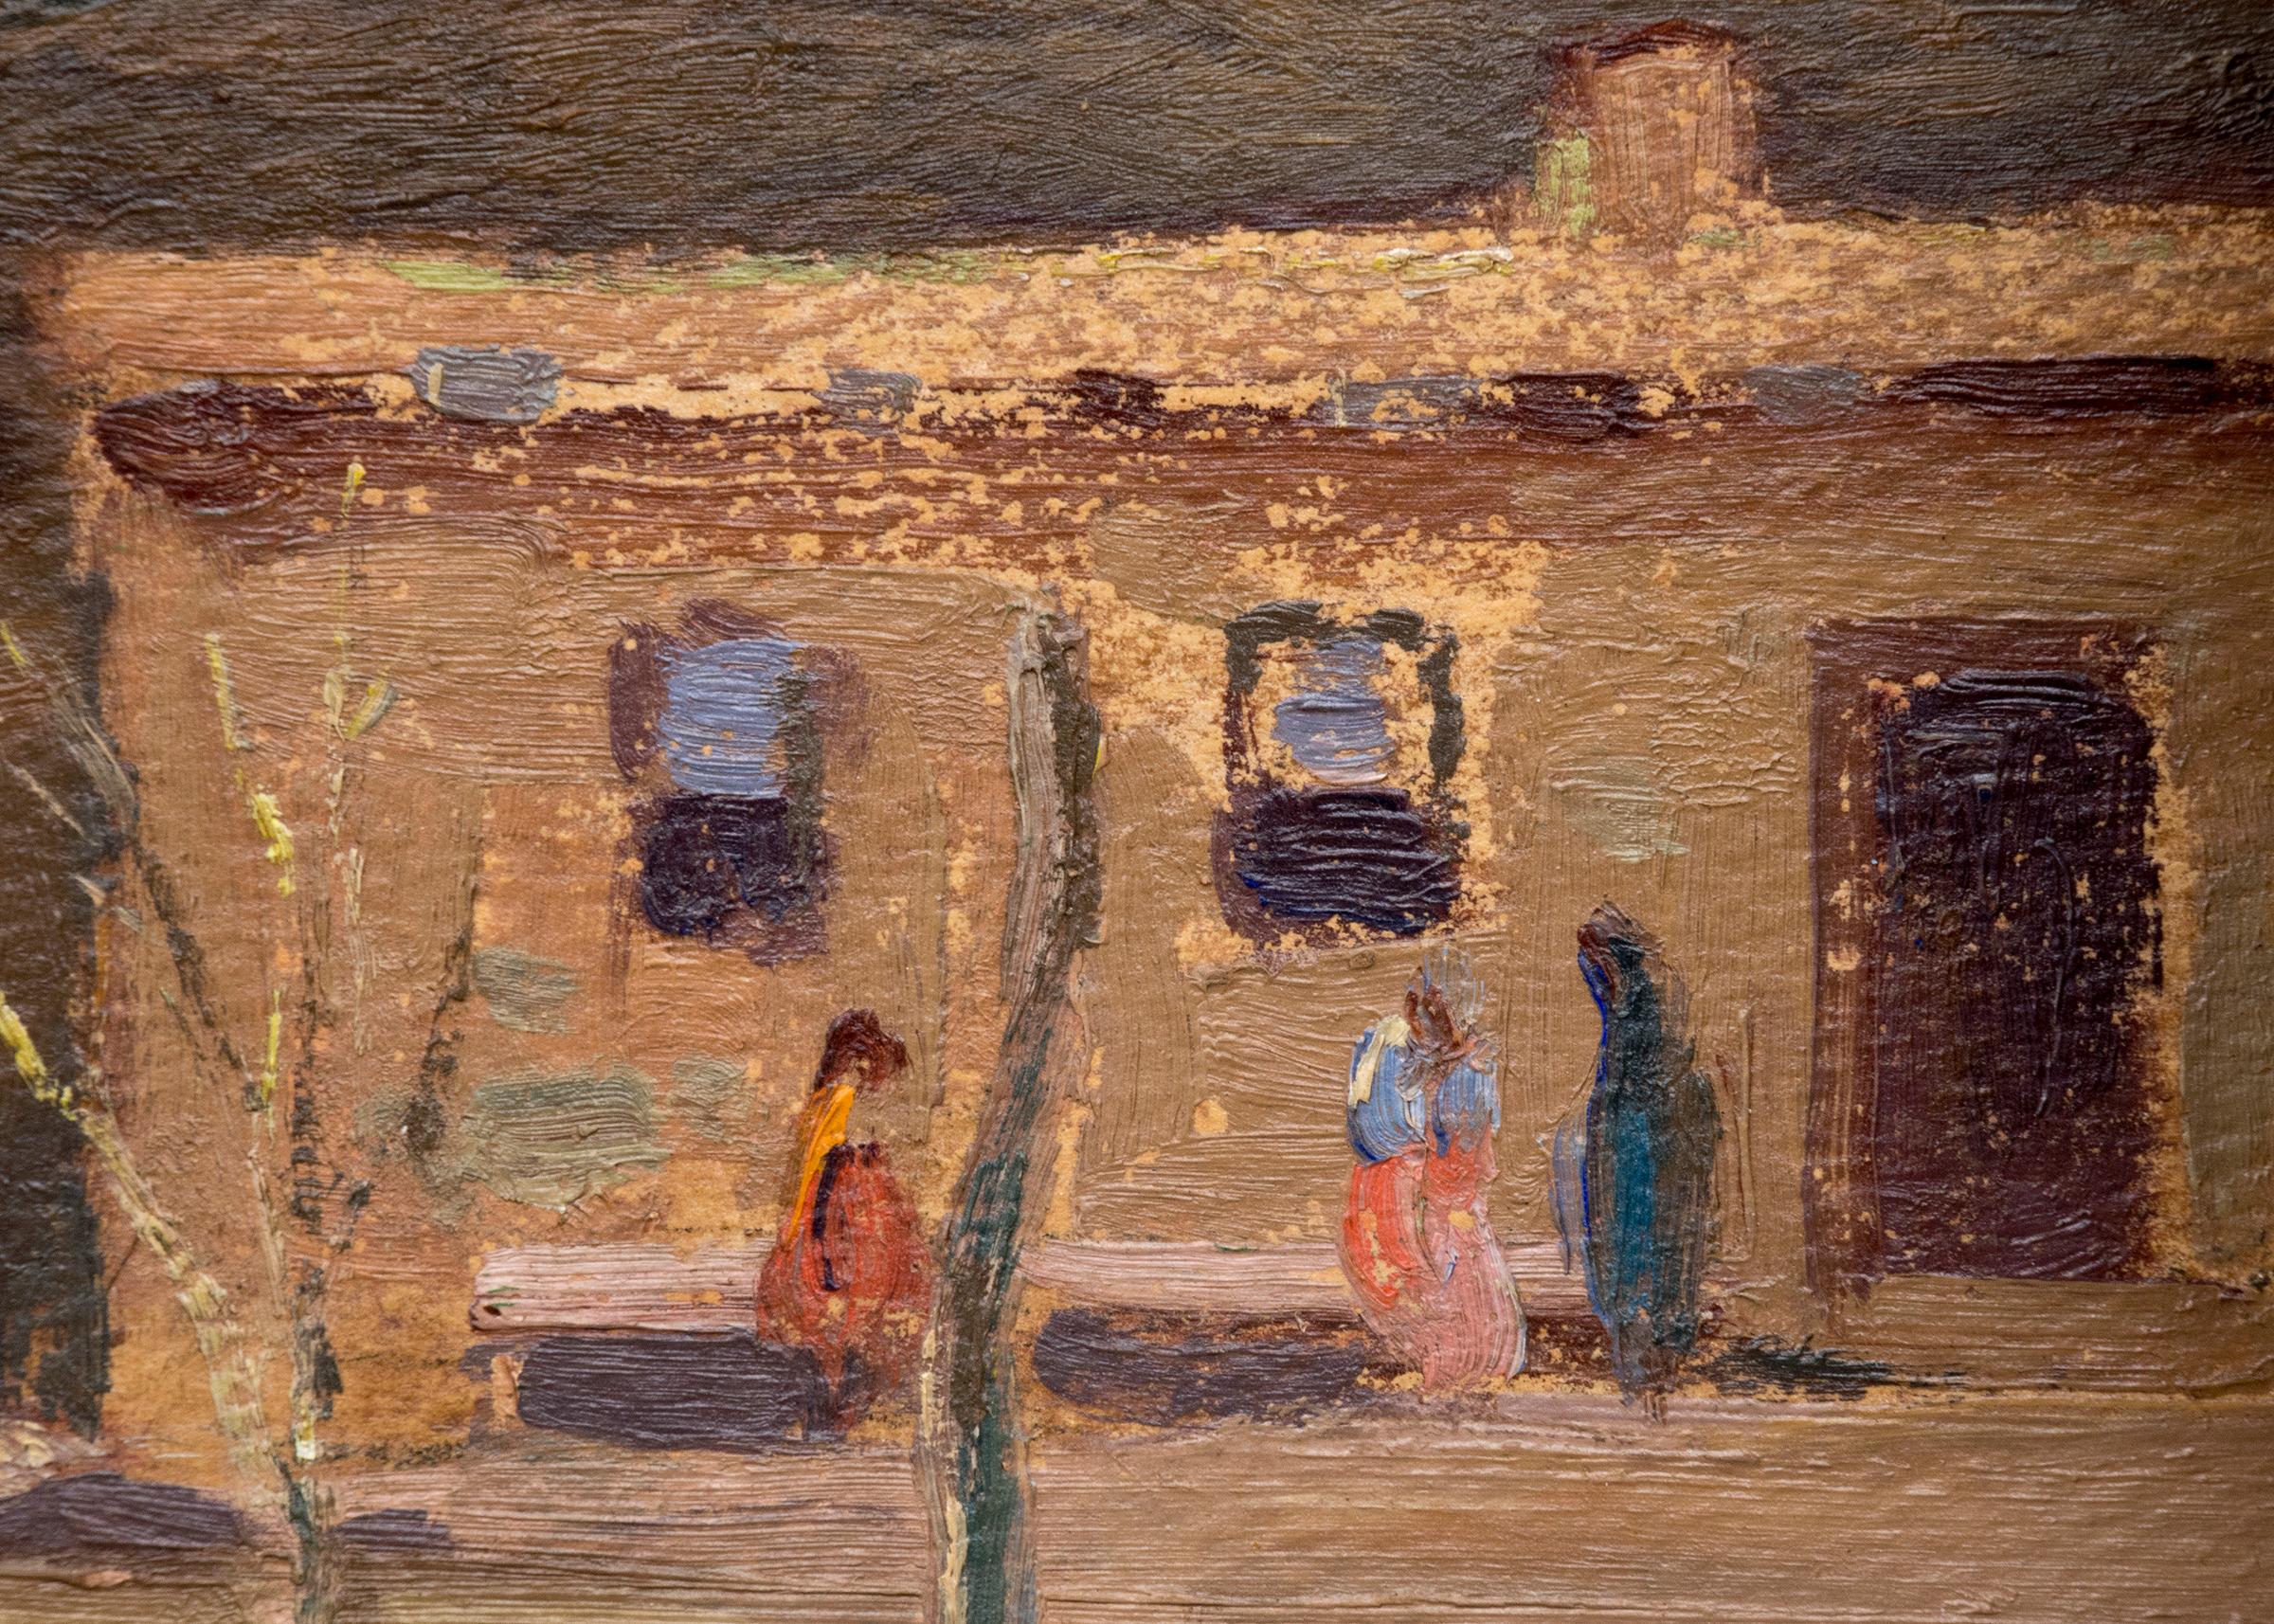 Oil on board landscape painting of a Pueblo near Santa Fe, New Mexico signed by artist Eliot Candee Clark (1883-1980), painted in 1932. Signed by the artist in the lower left corner. Composed of shades of brown, tan, and blue. Presented in a custom